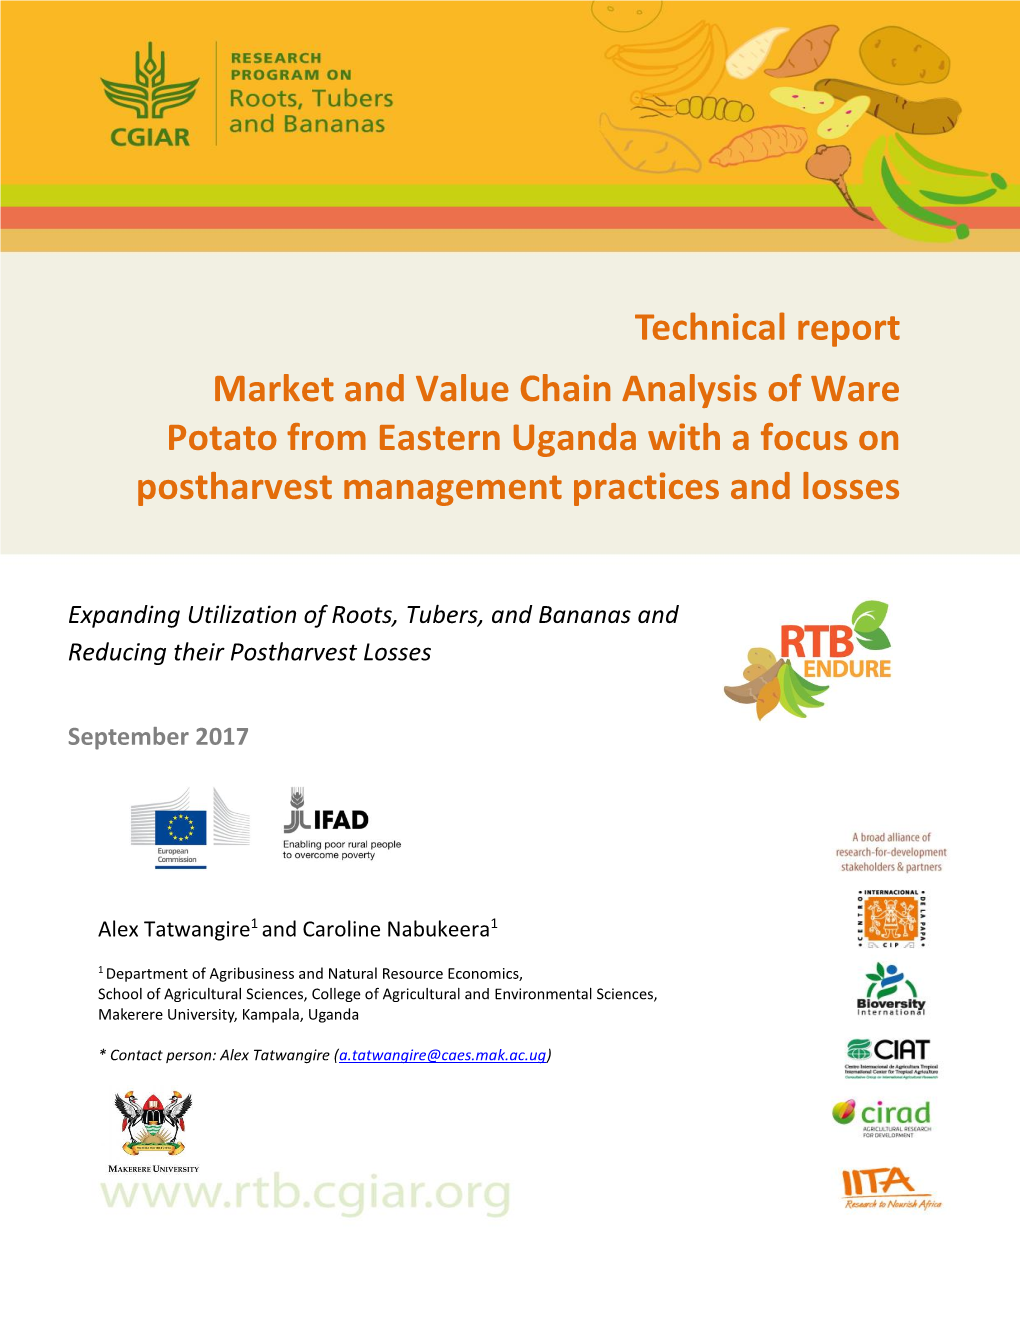 Technical Report Market and Value Chain Analysis of Ware Potato from Eastern Uganda with a Focus on Postharvest Management Practices and Losses